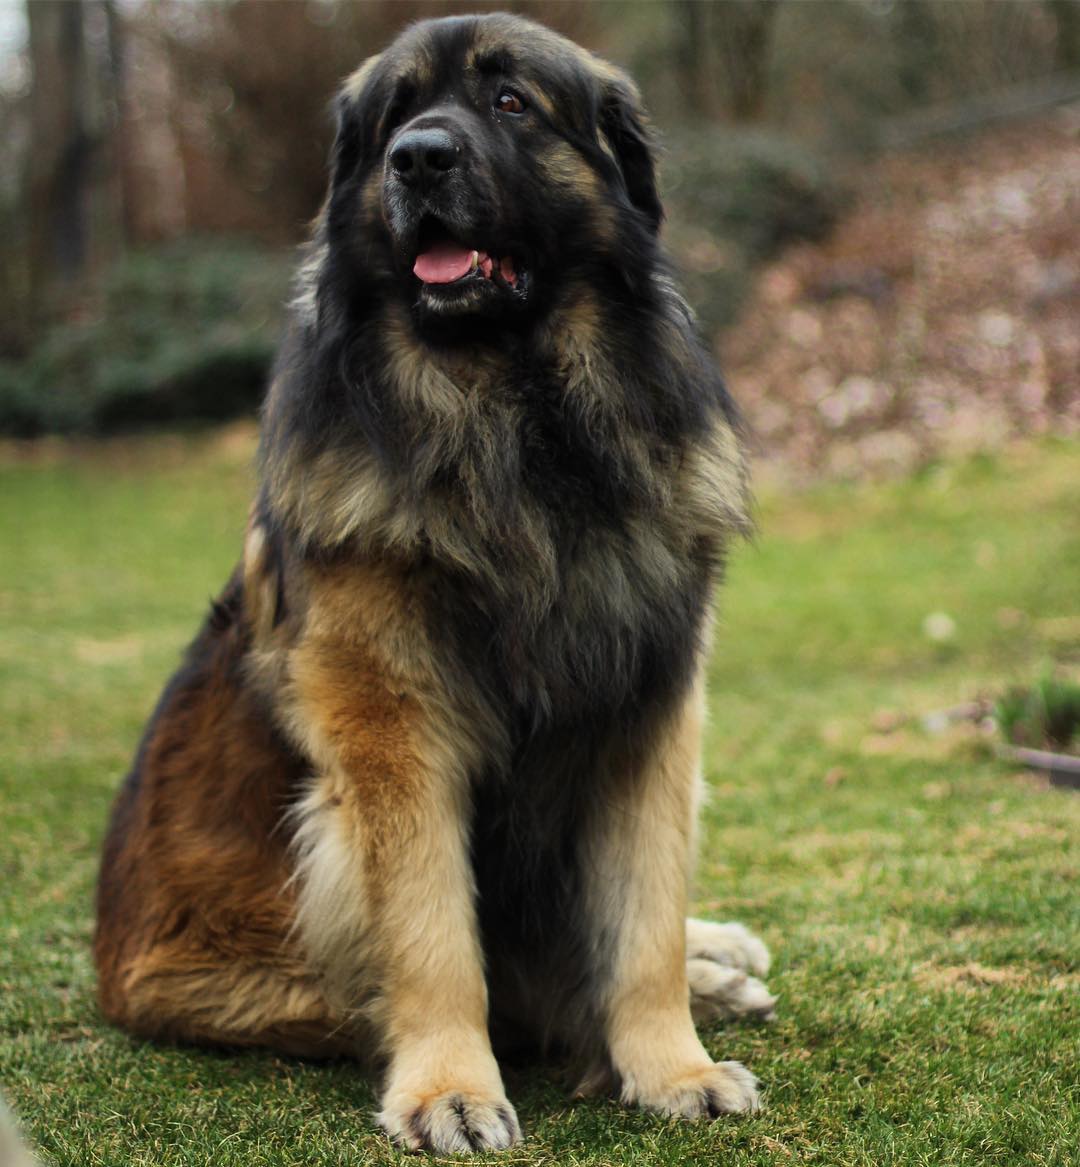 A Leonberger sitting on the grass